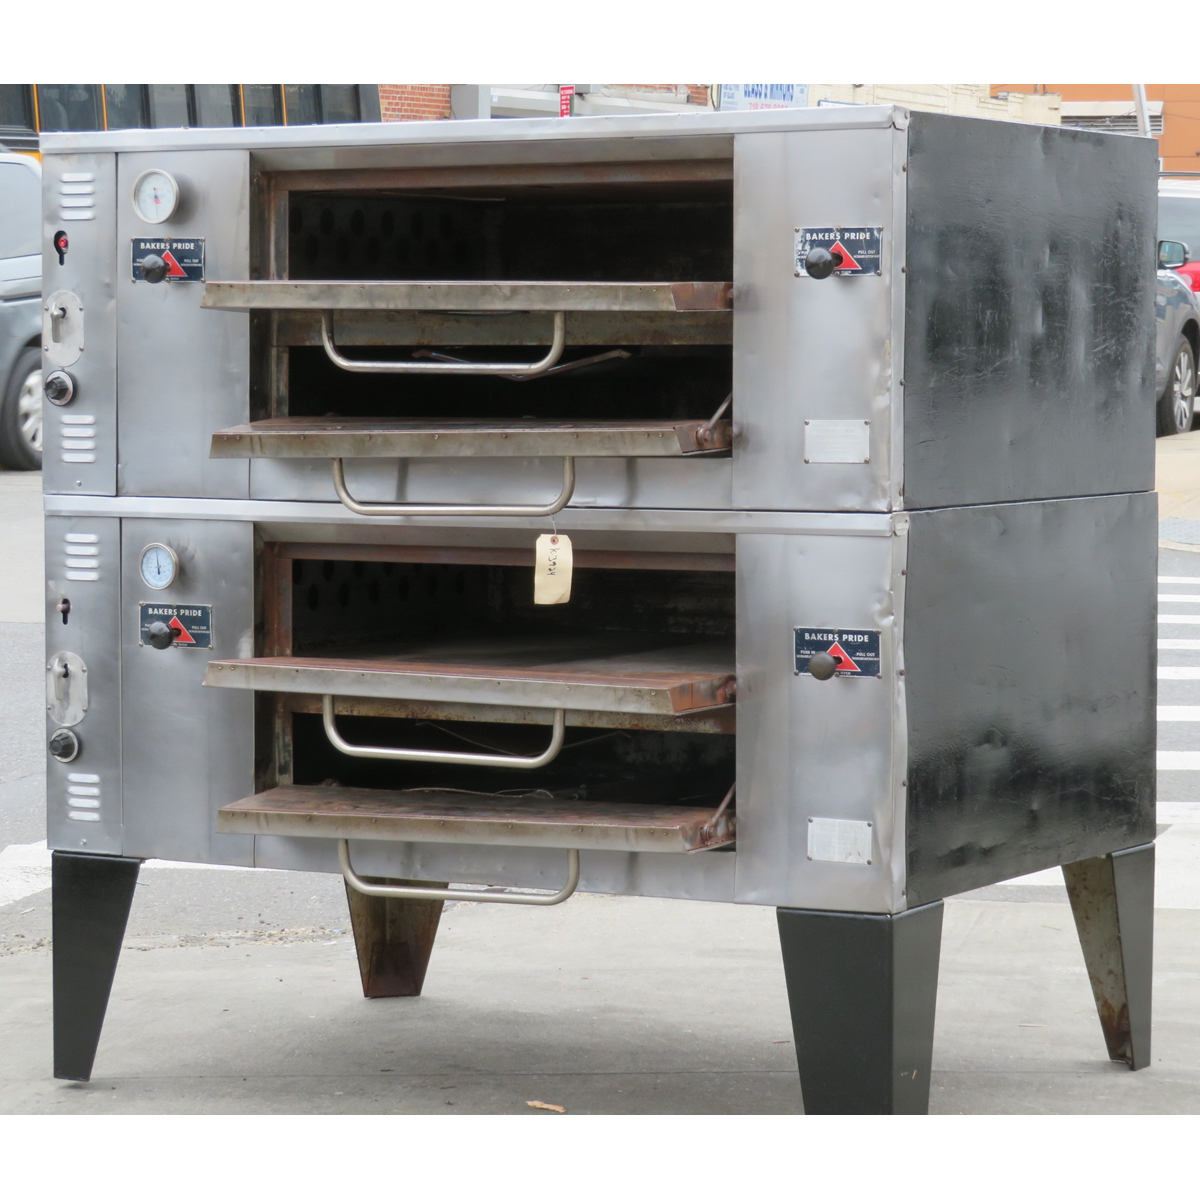 Bakers Pride DS-805 Pizza Oven Double Deck, Used Great Condition image 3